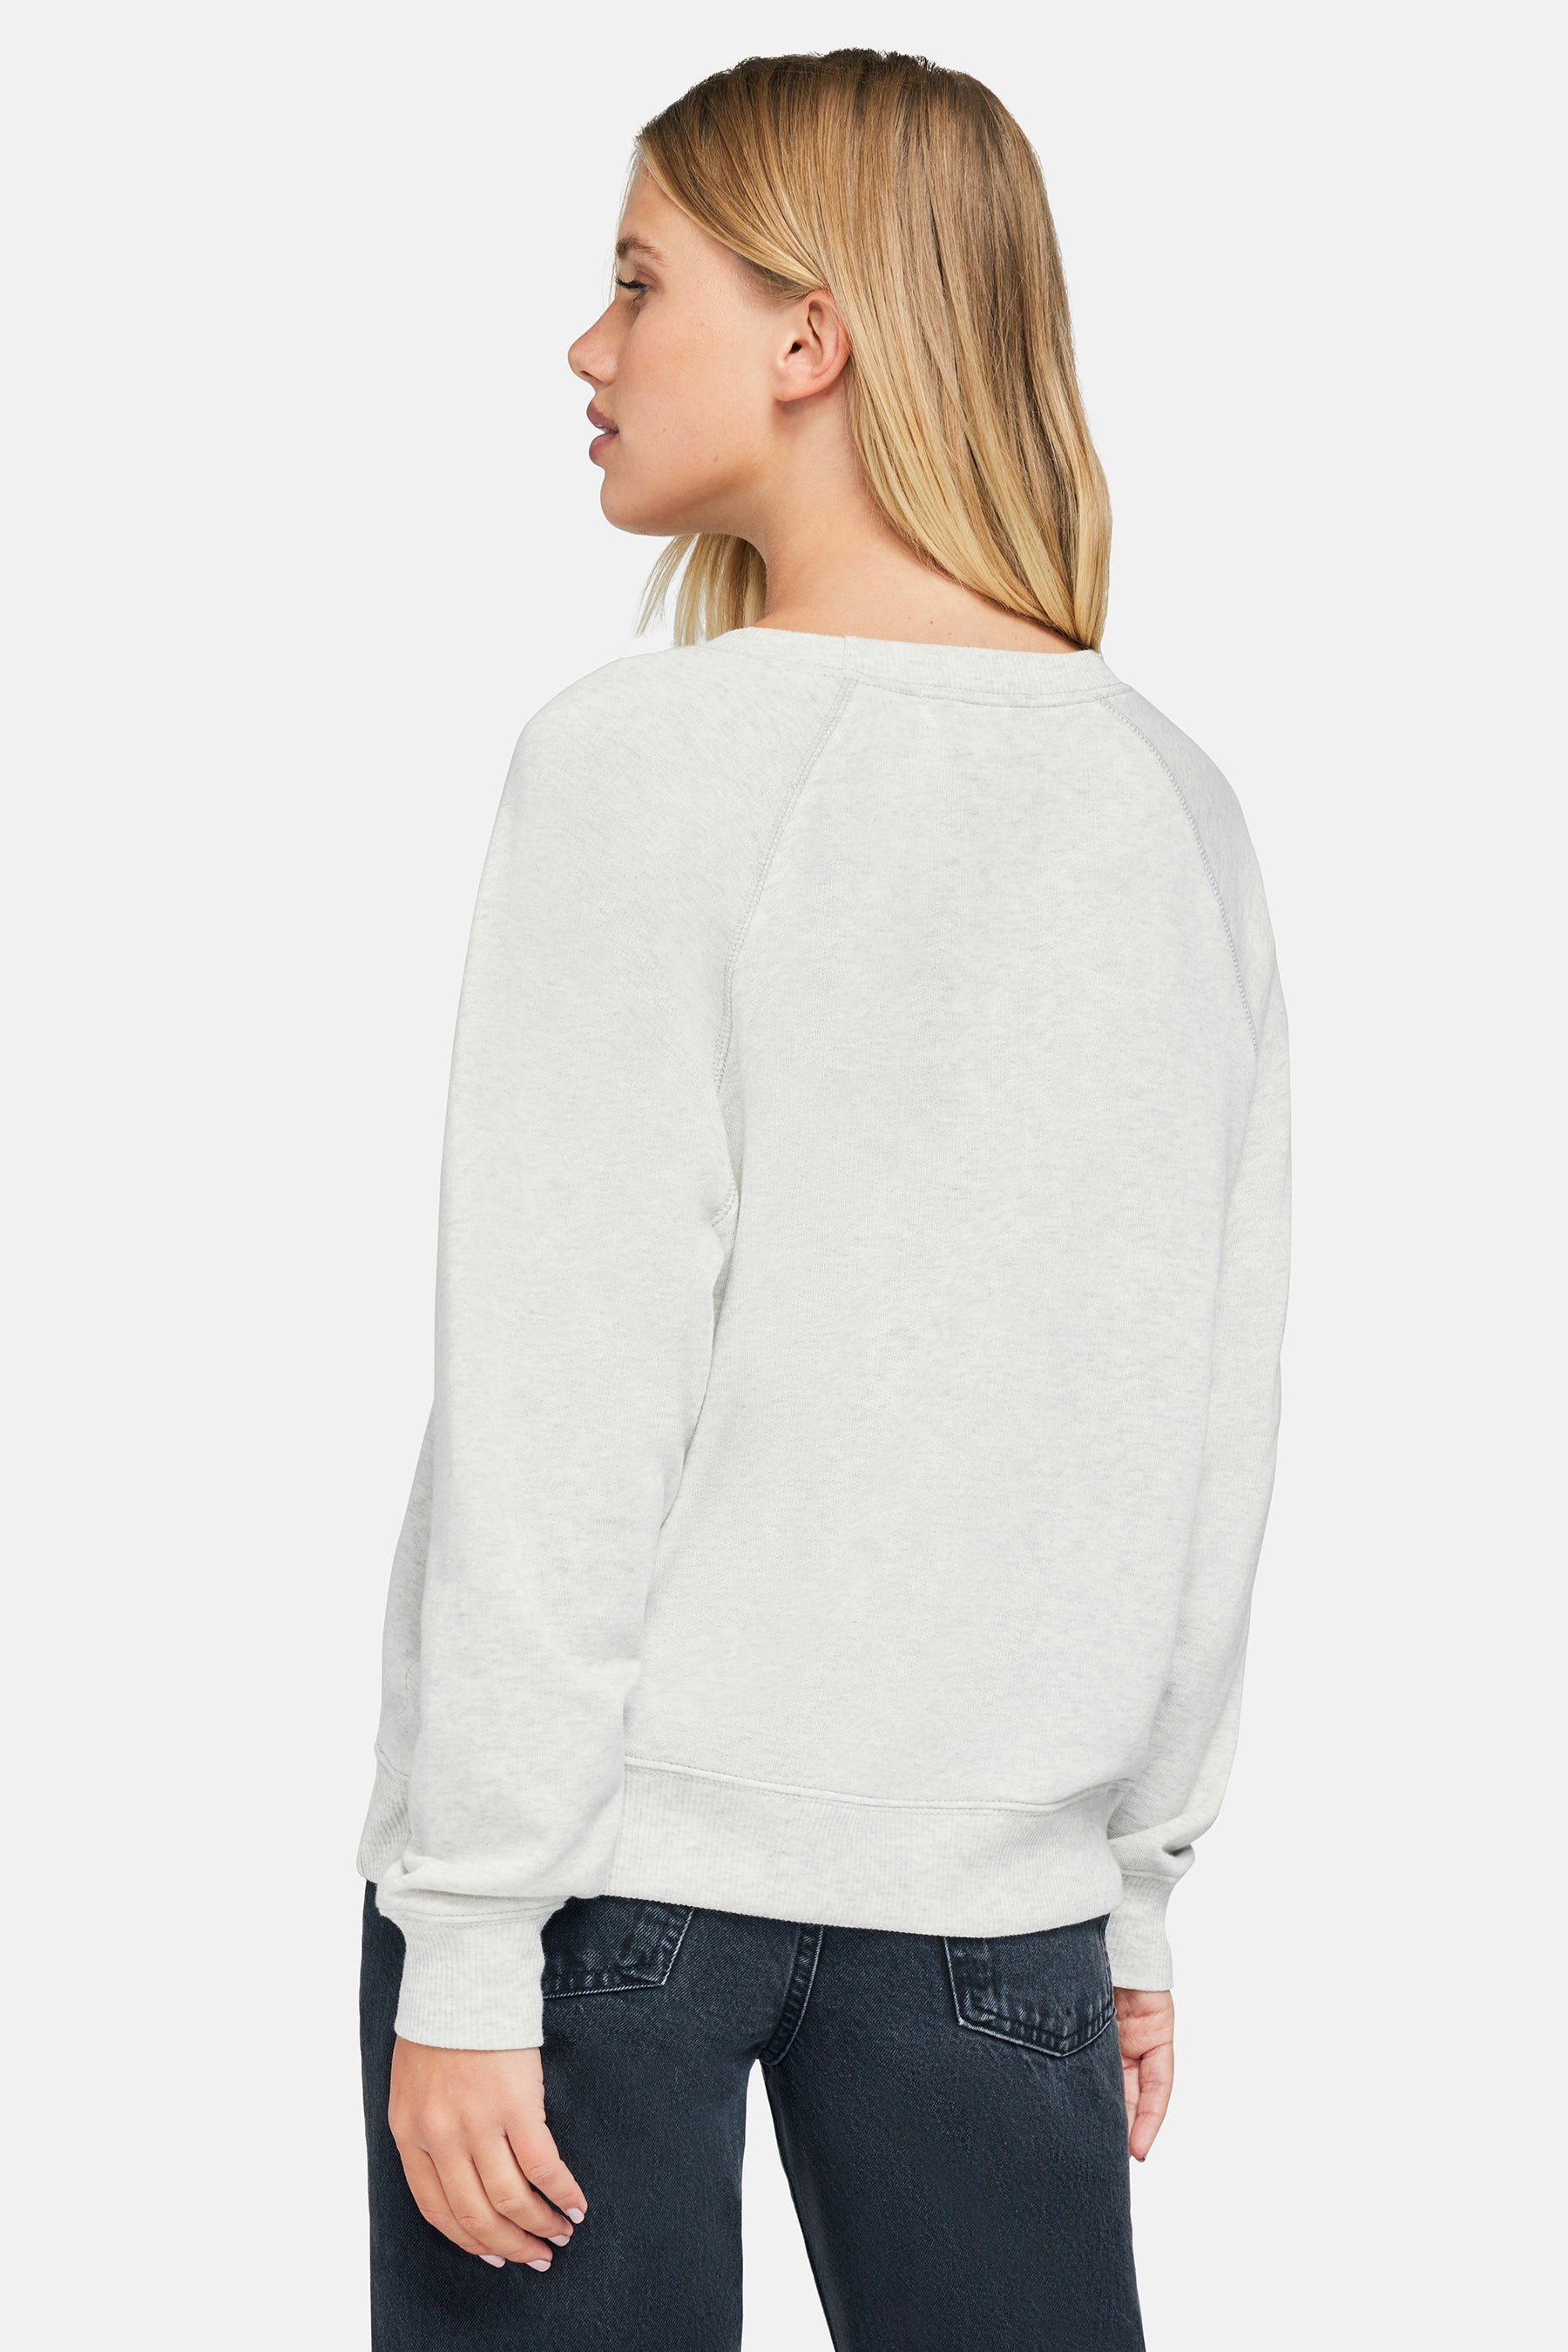 Candy Hearts Sommers Sweatshirt | Pearl Grey